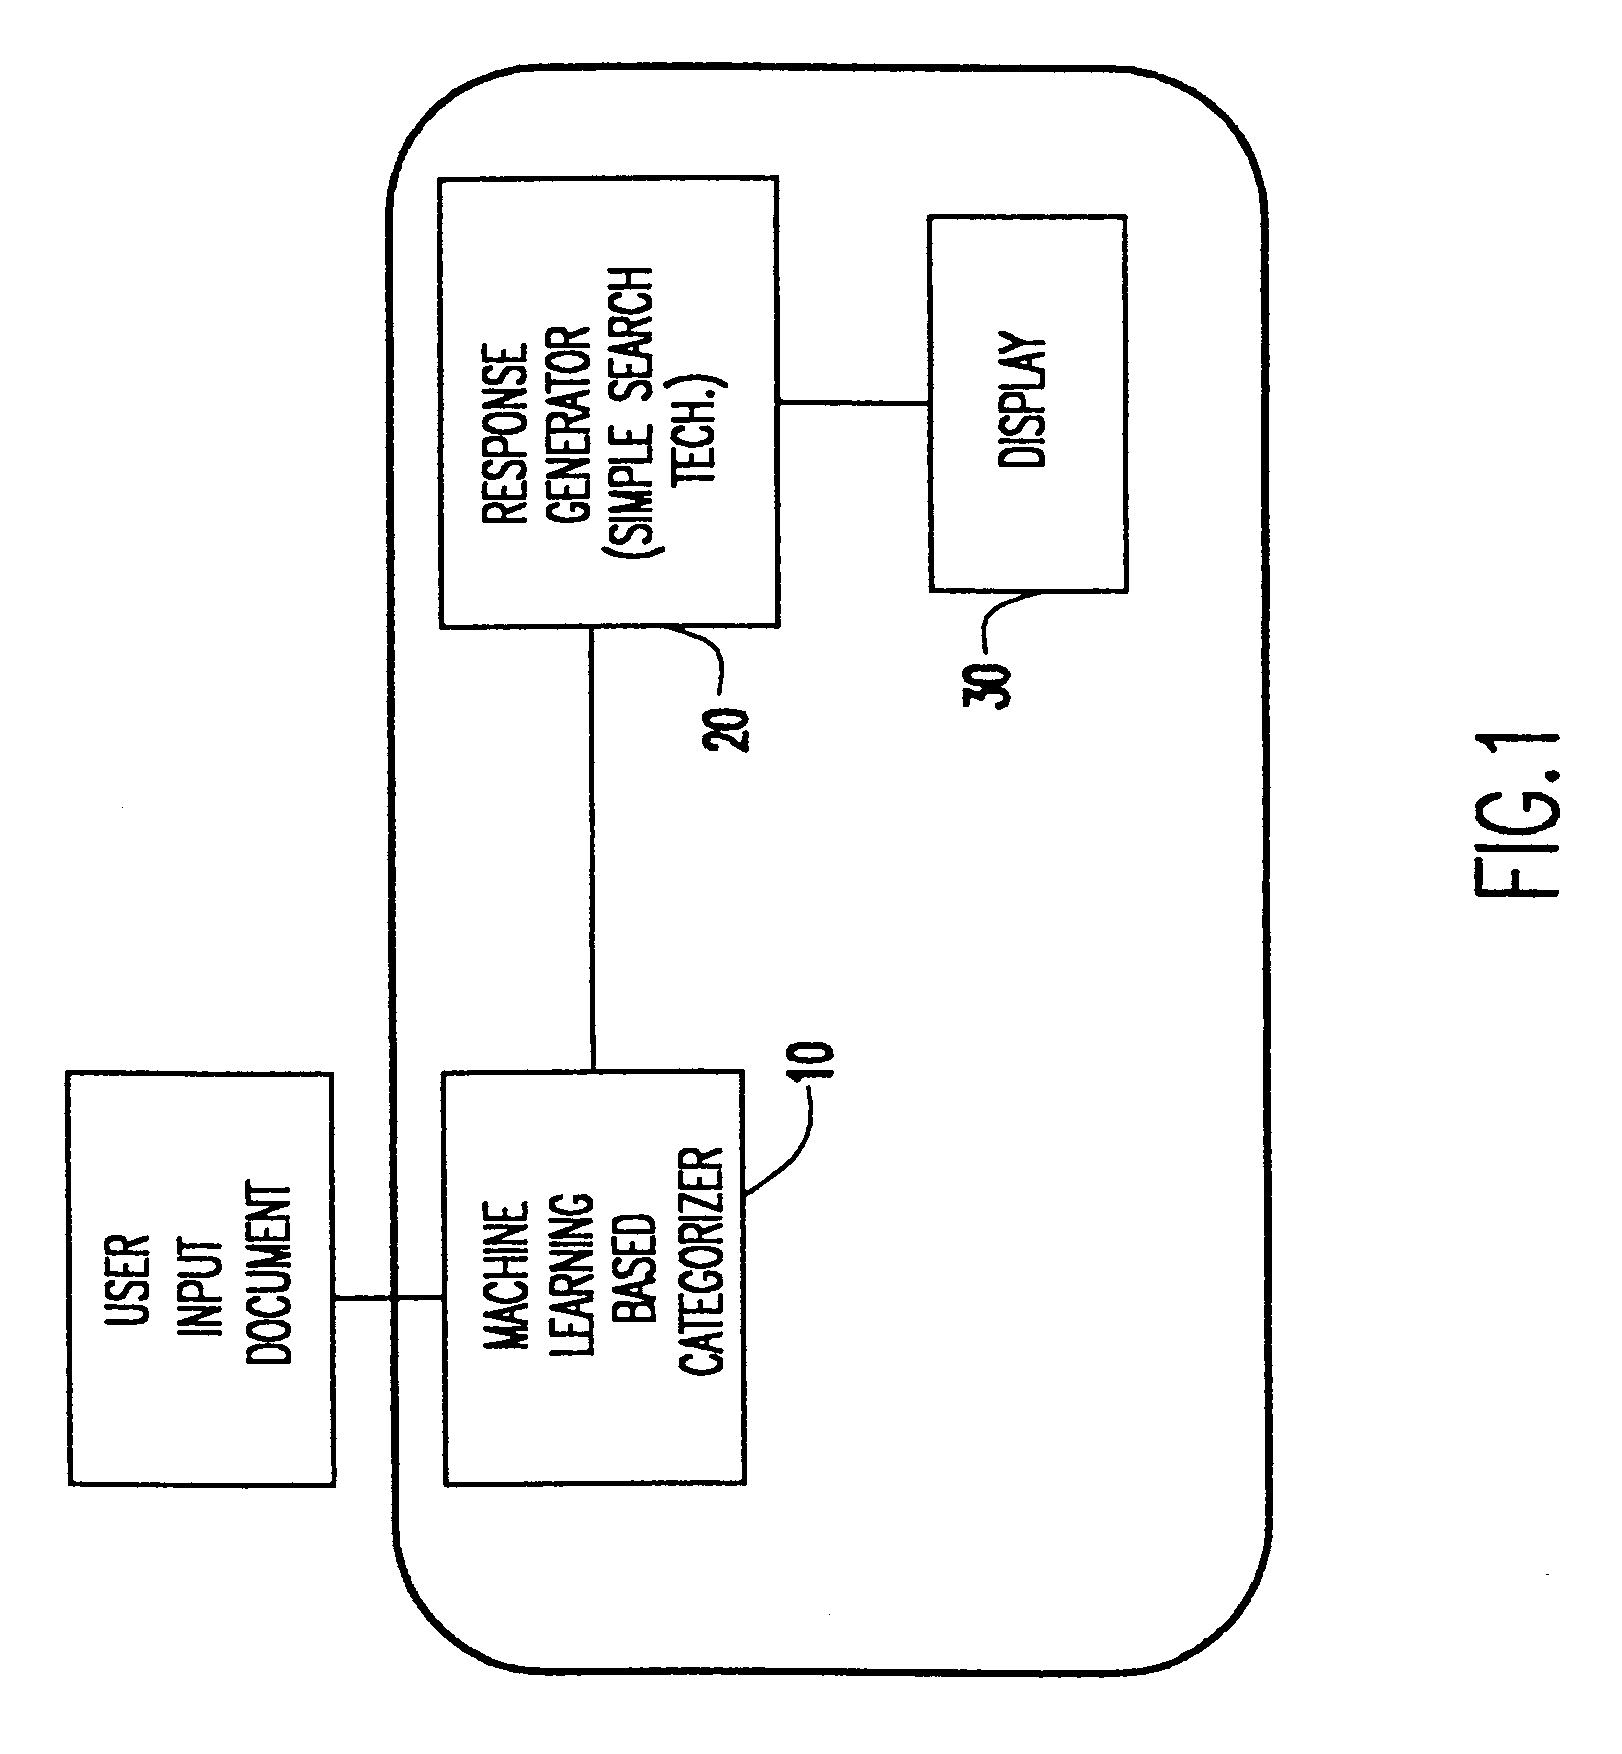 Two stage automated electronic messaging system